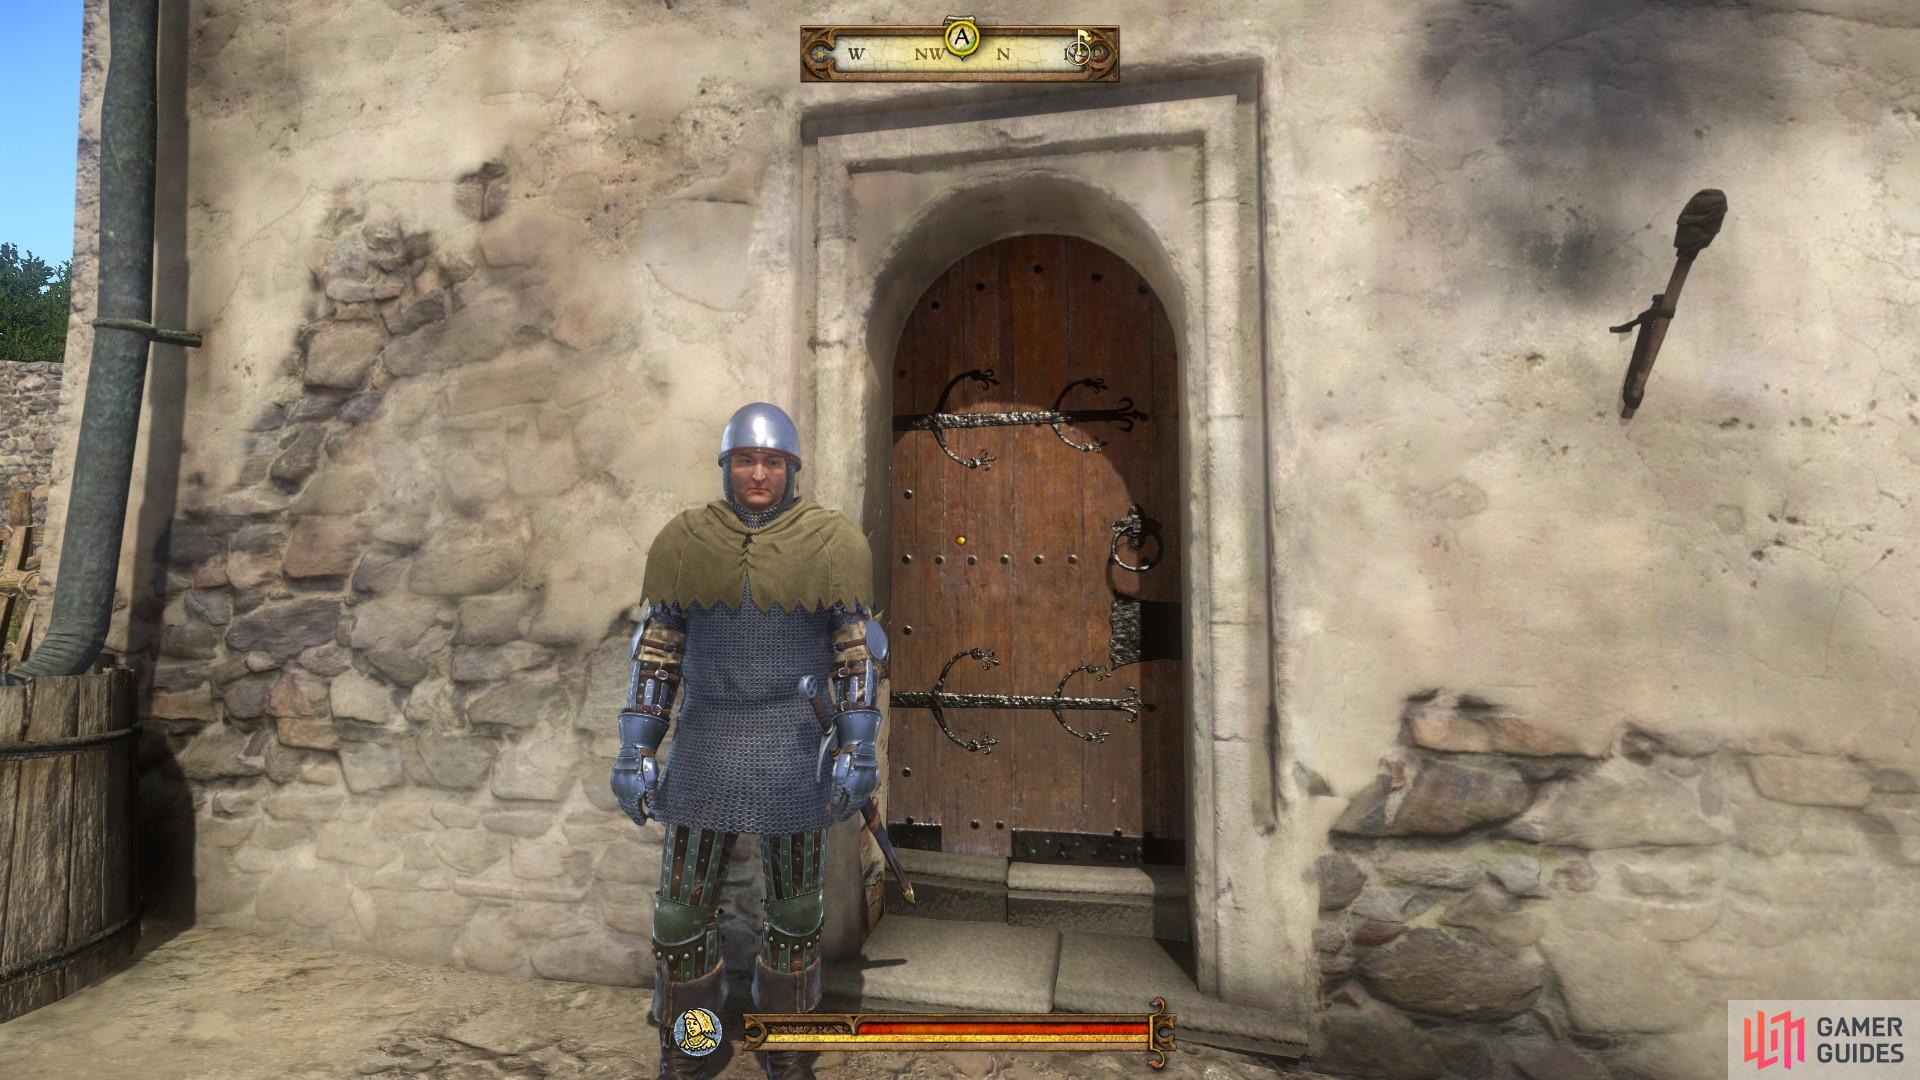 Speak with the guard and tell him that you have been sent by Master Feyfar to gain entry.